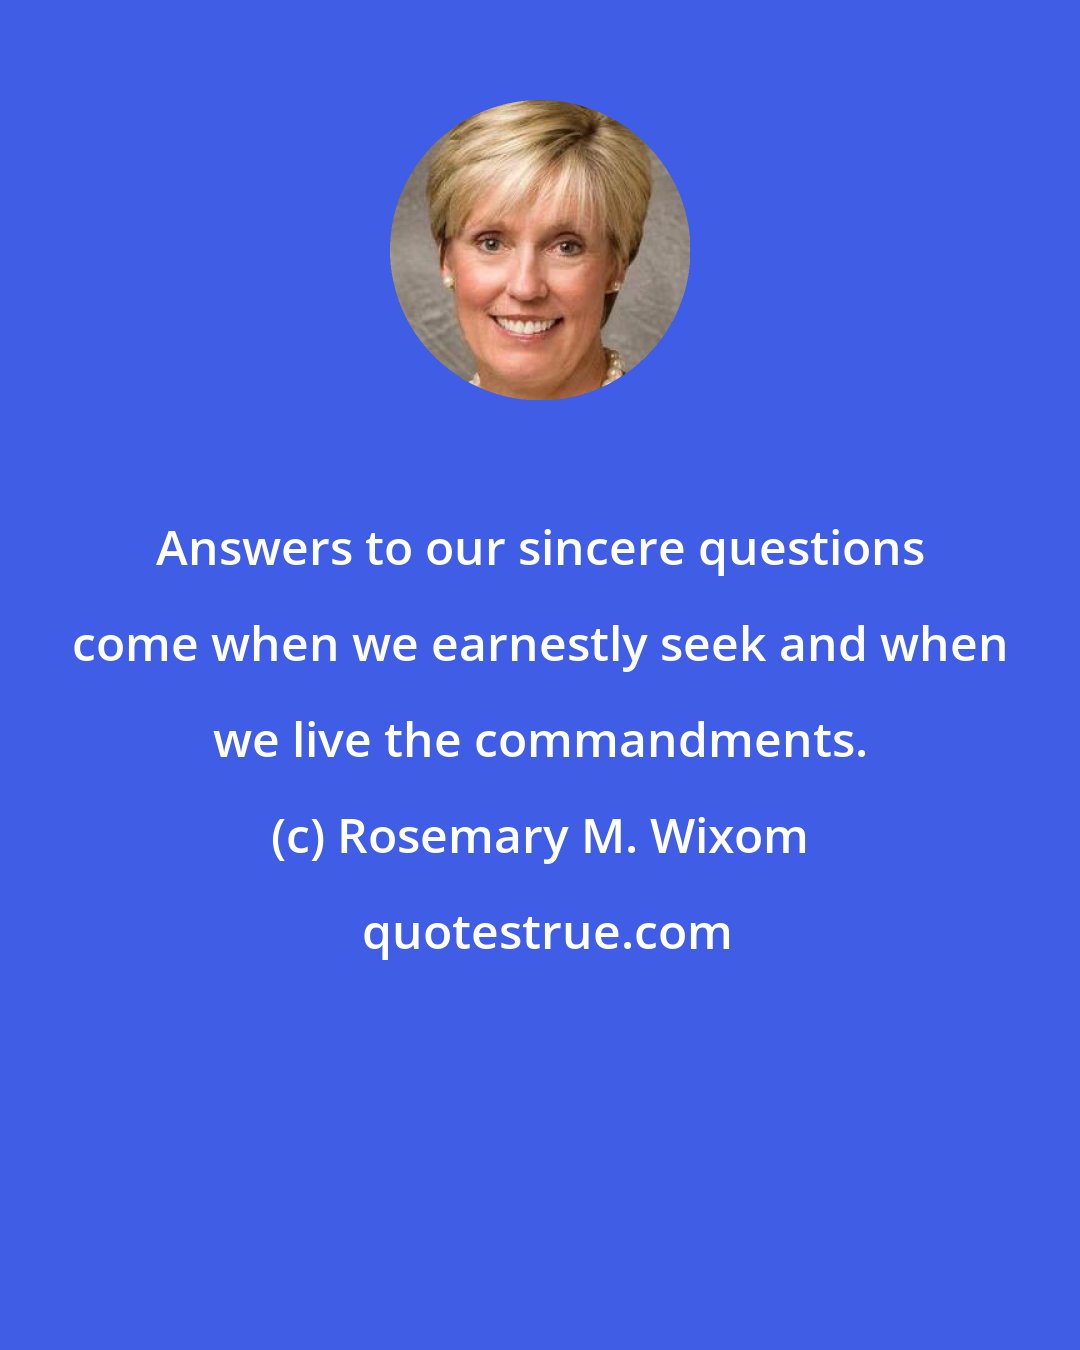 Rosemary M. Wixom: Answers to our sincere questions come when we earnestly seek and when we live the commandments.